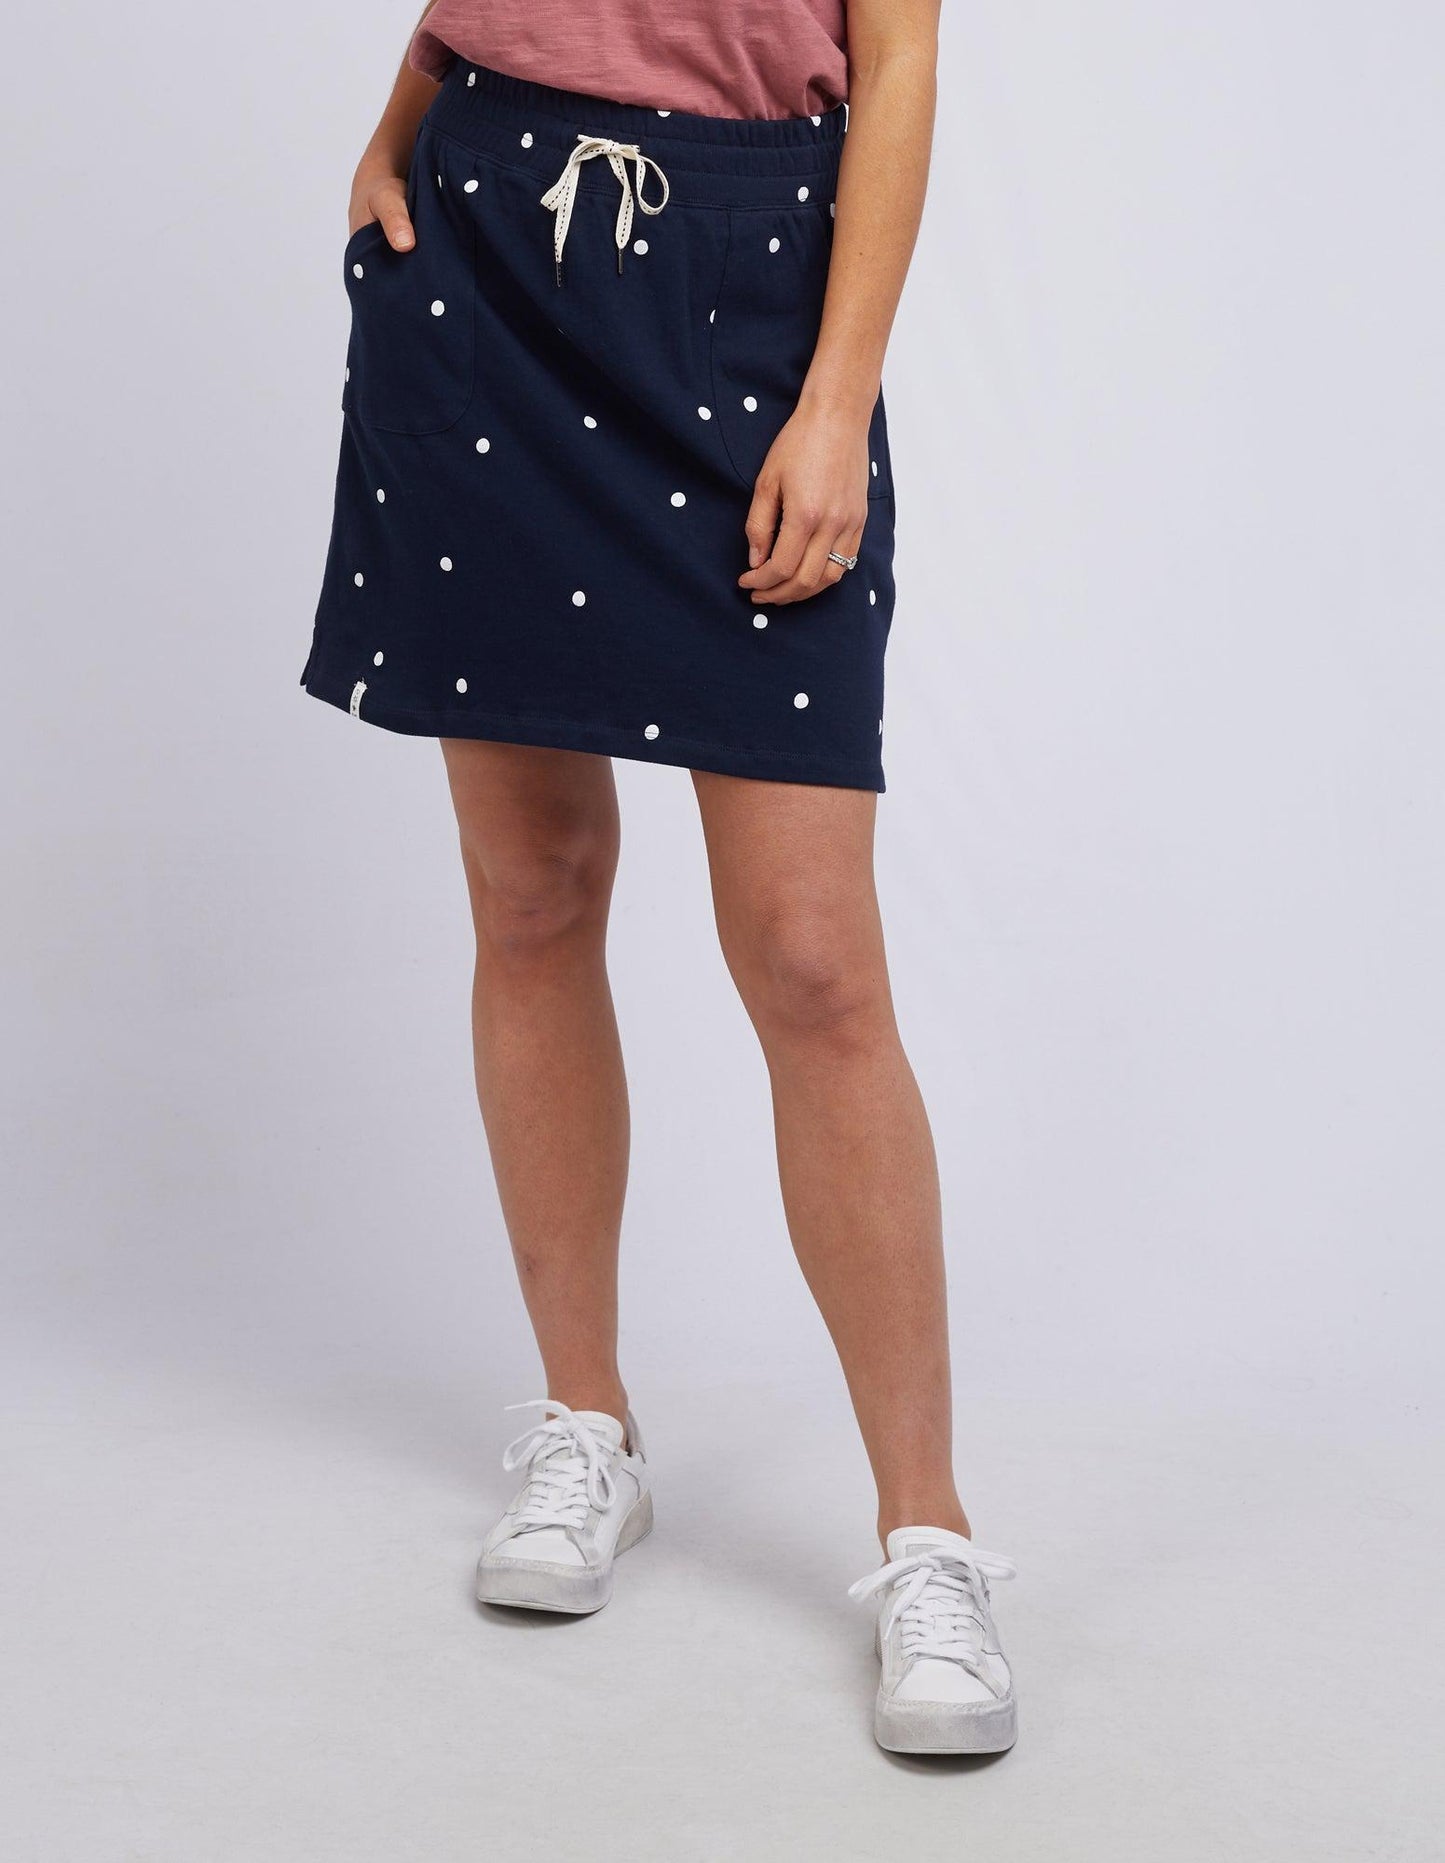 Cassie Skirt Spot - Navy With White Spot - Elm Lifestyle - FUDGE Gifts Home Lifestyle